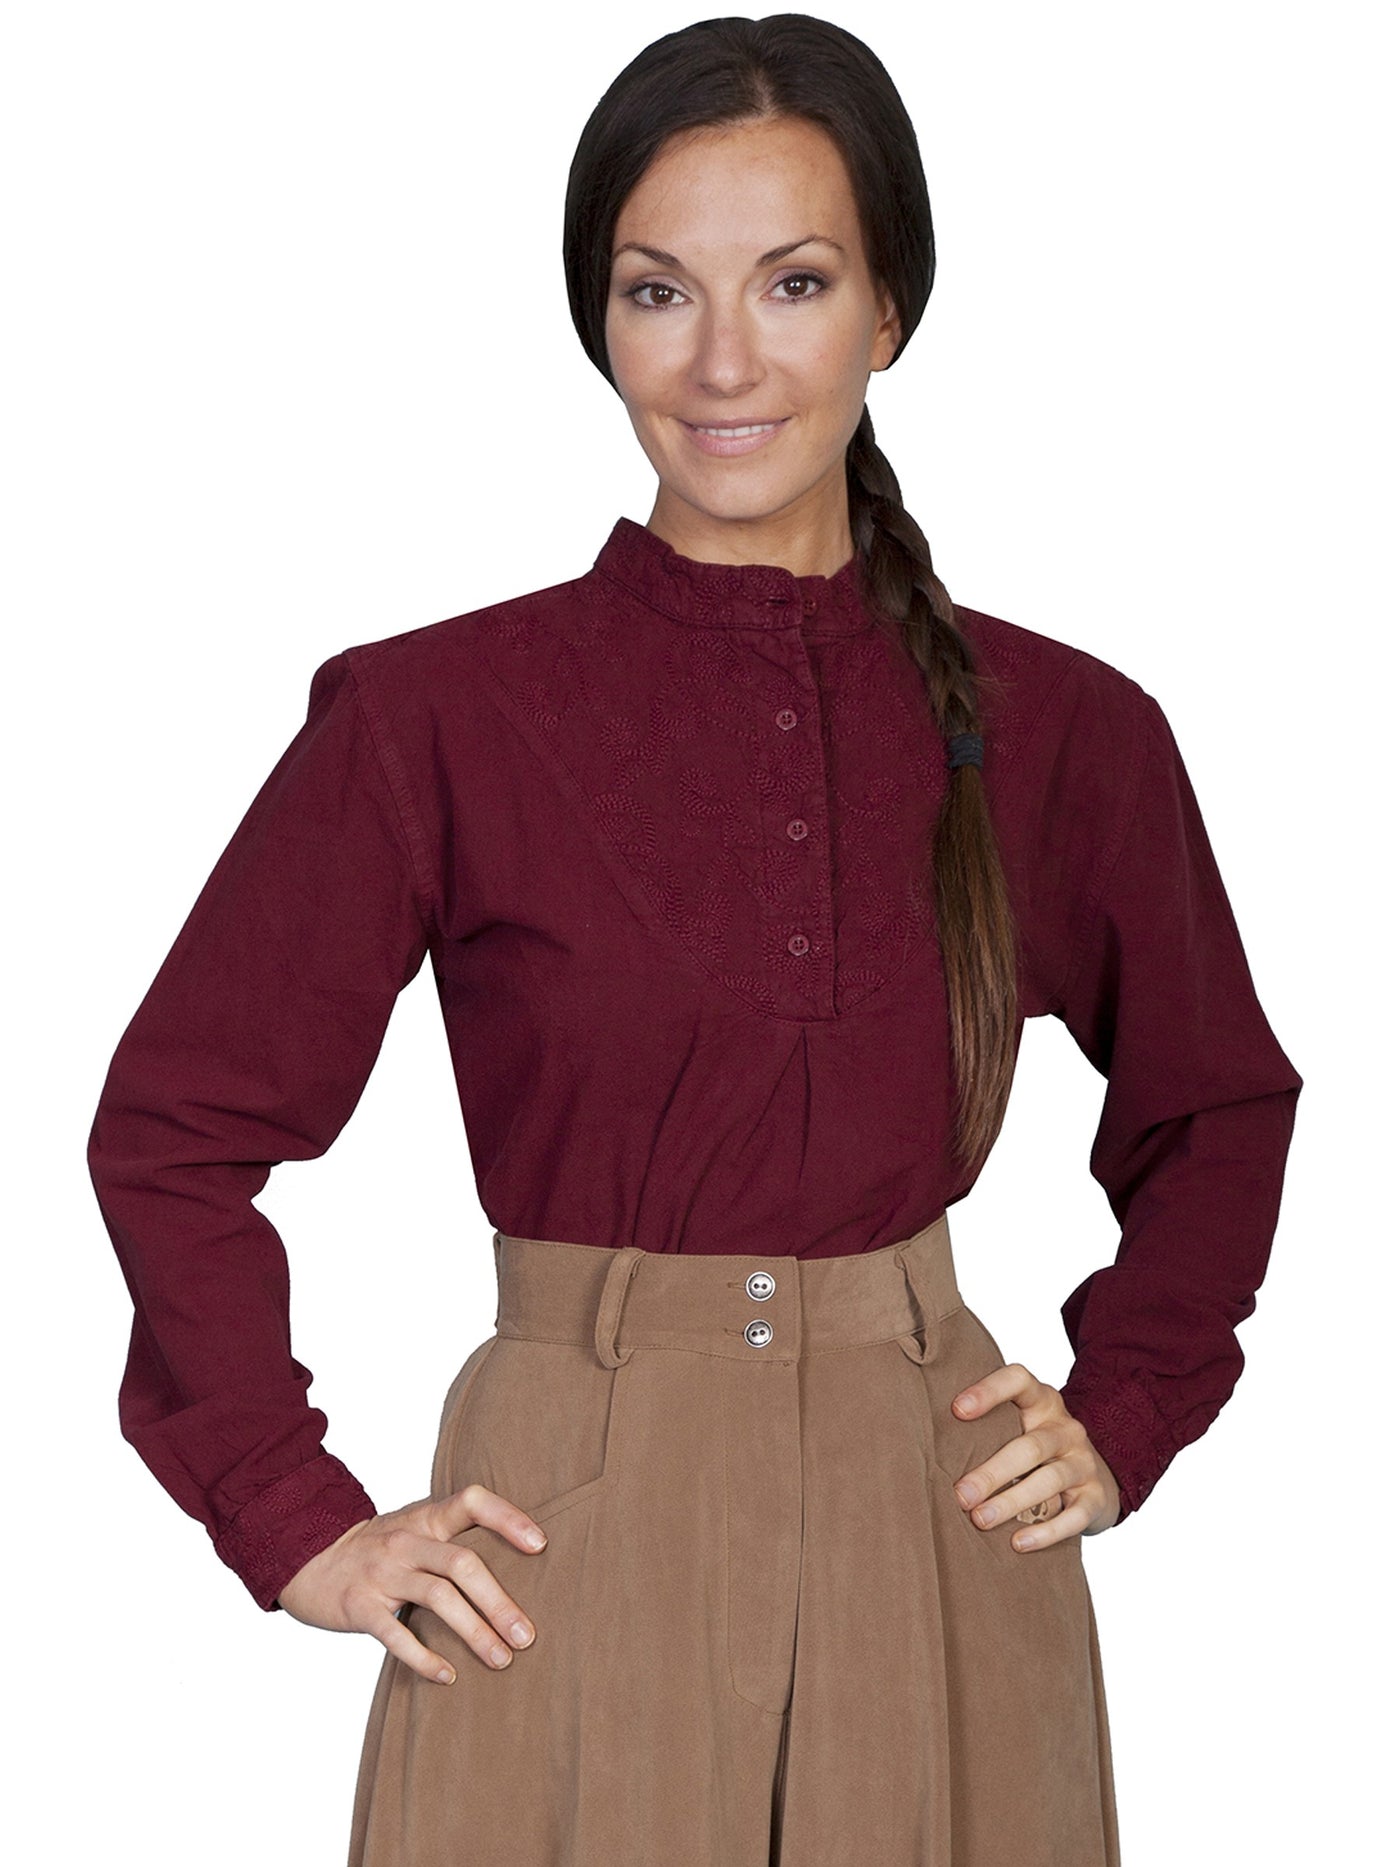 Farmhouse Style Blouse in Burgundy - SOLD OUT